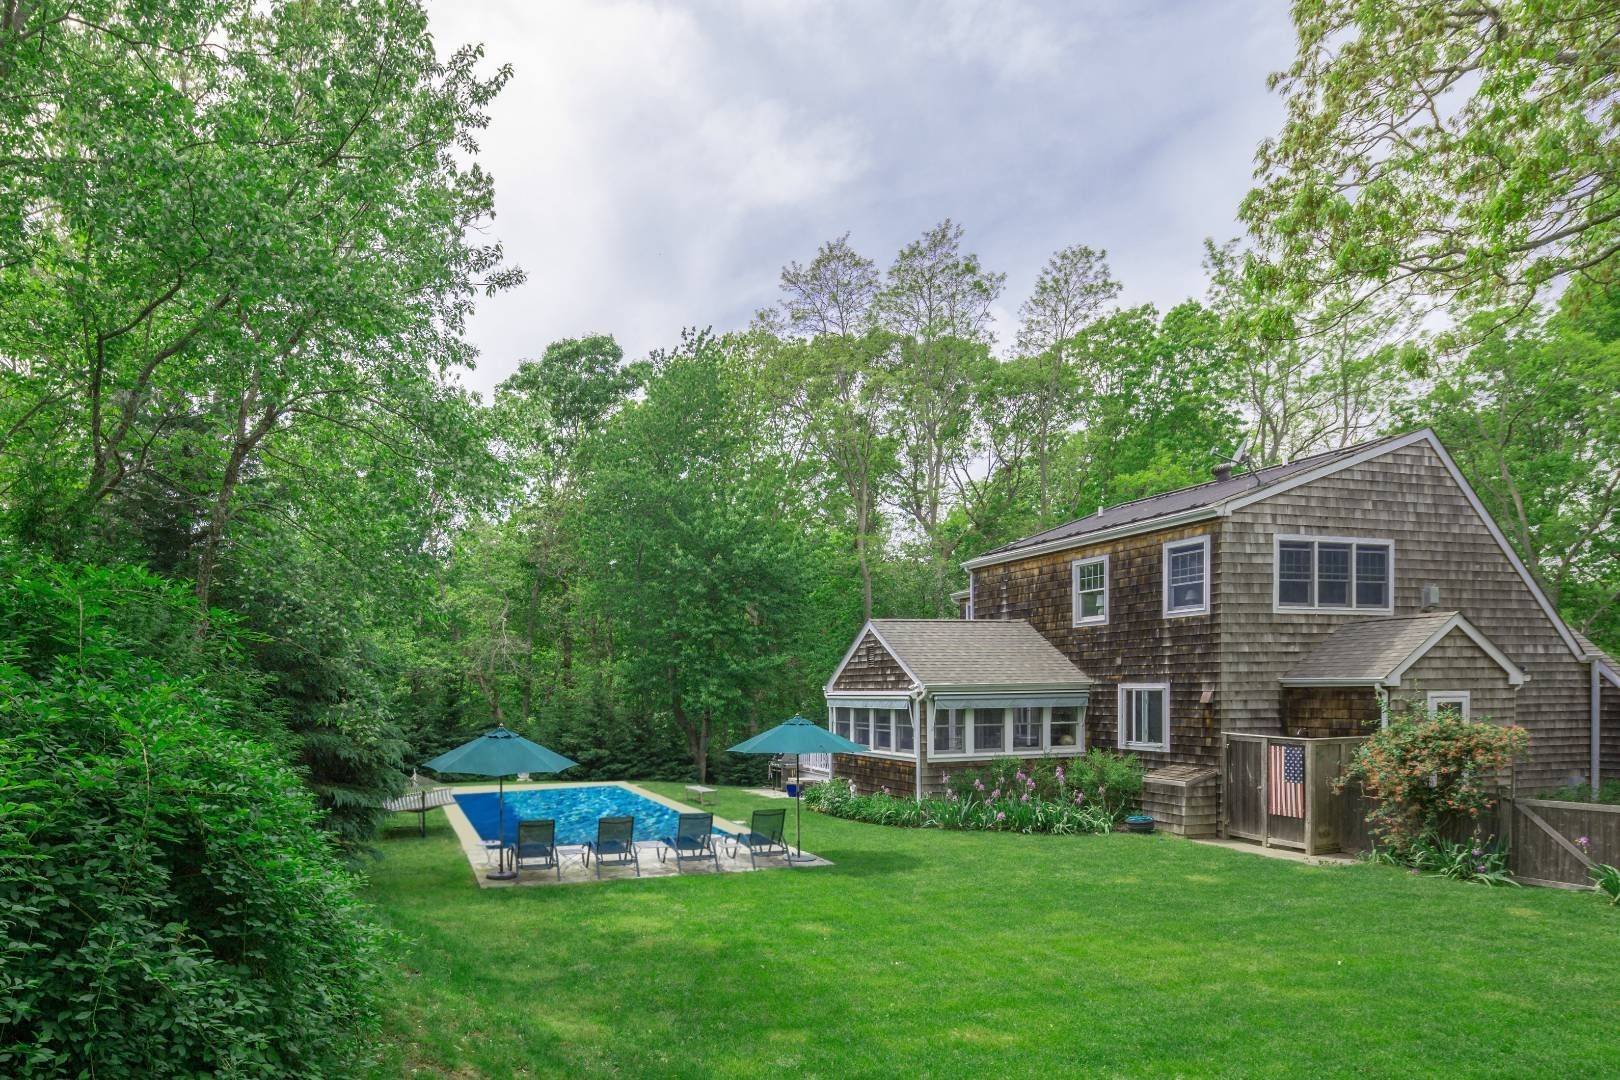 Peaceful retreat awaits in Sag Harbor-Your own secluded getaway!